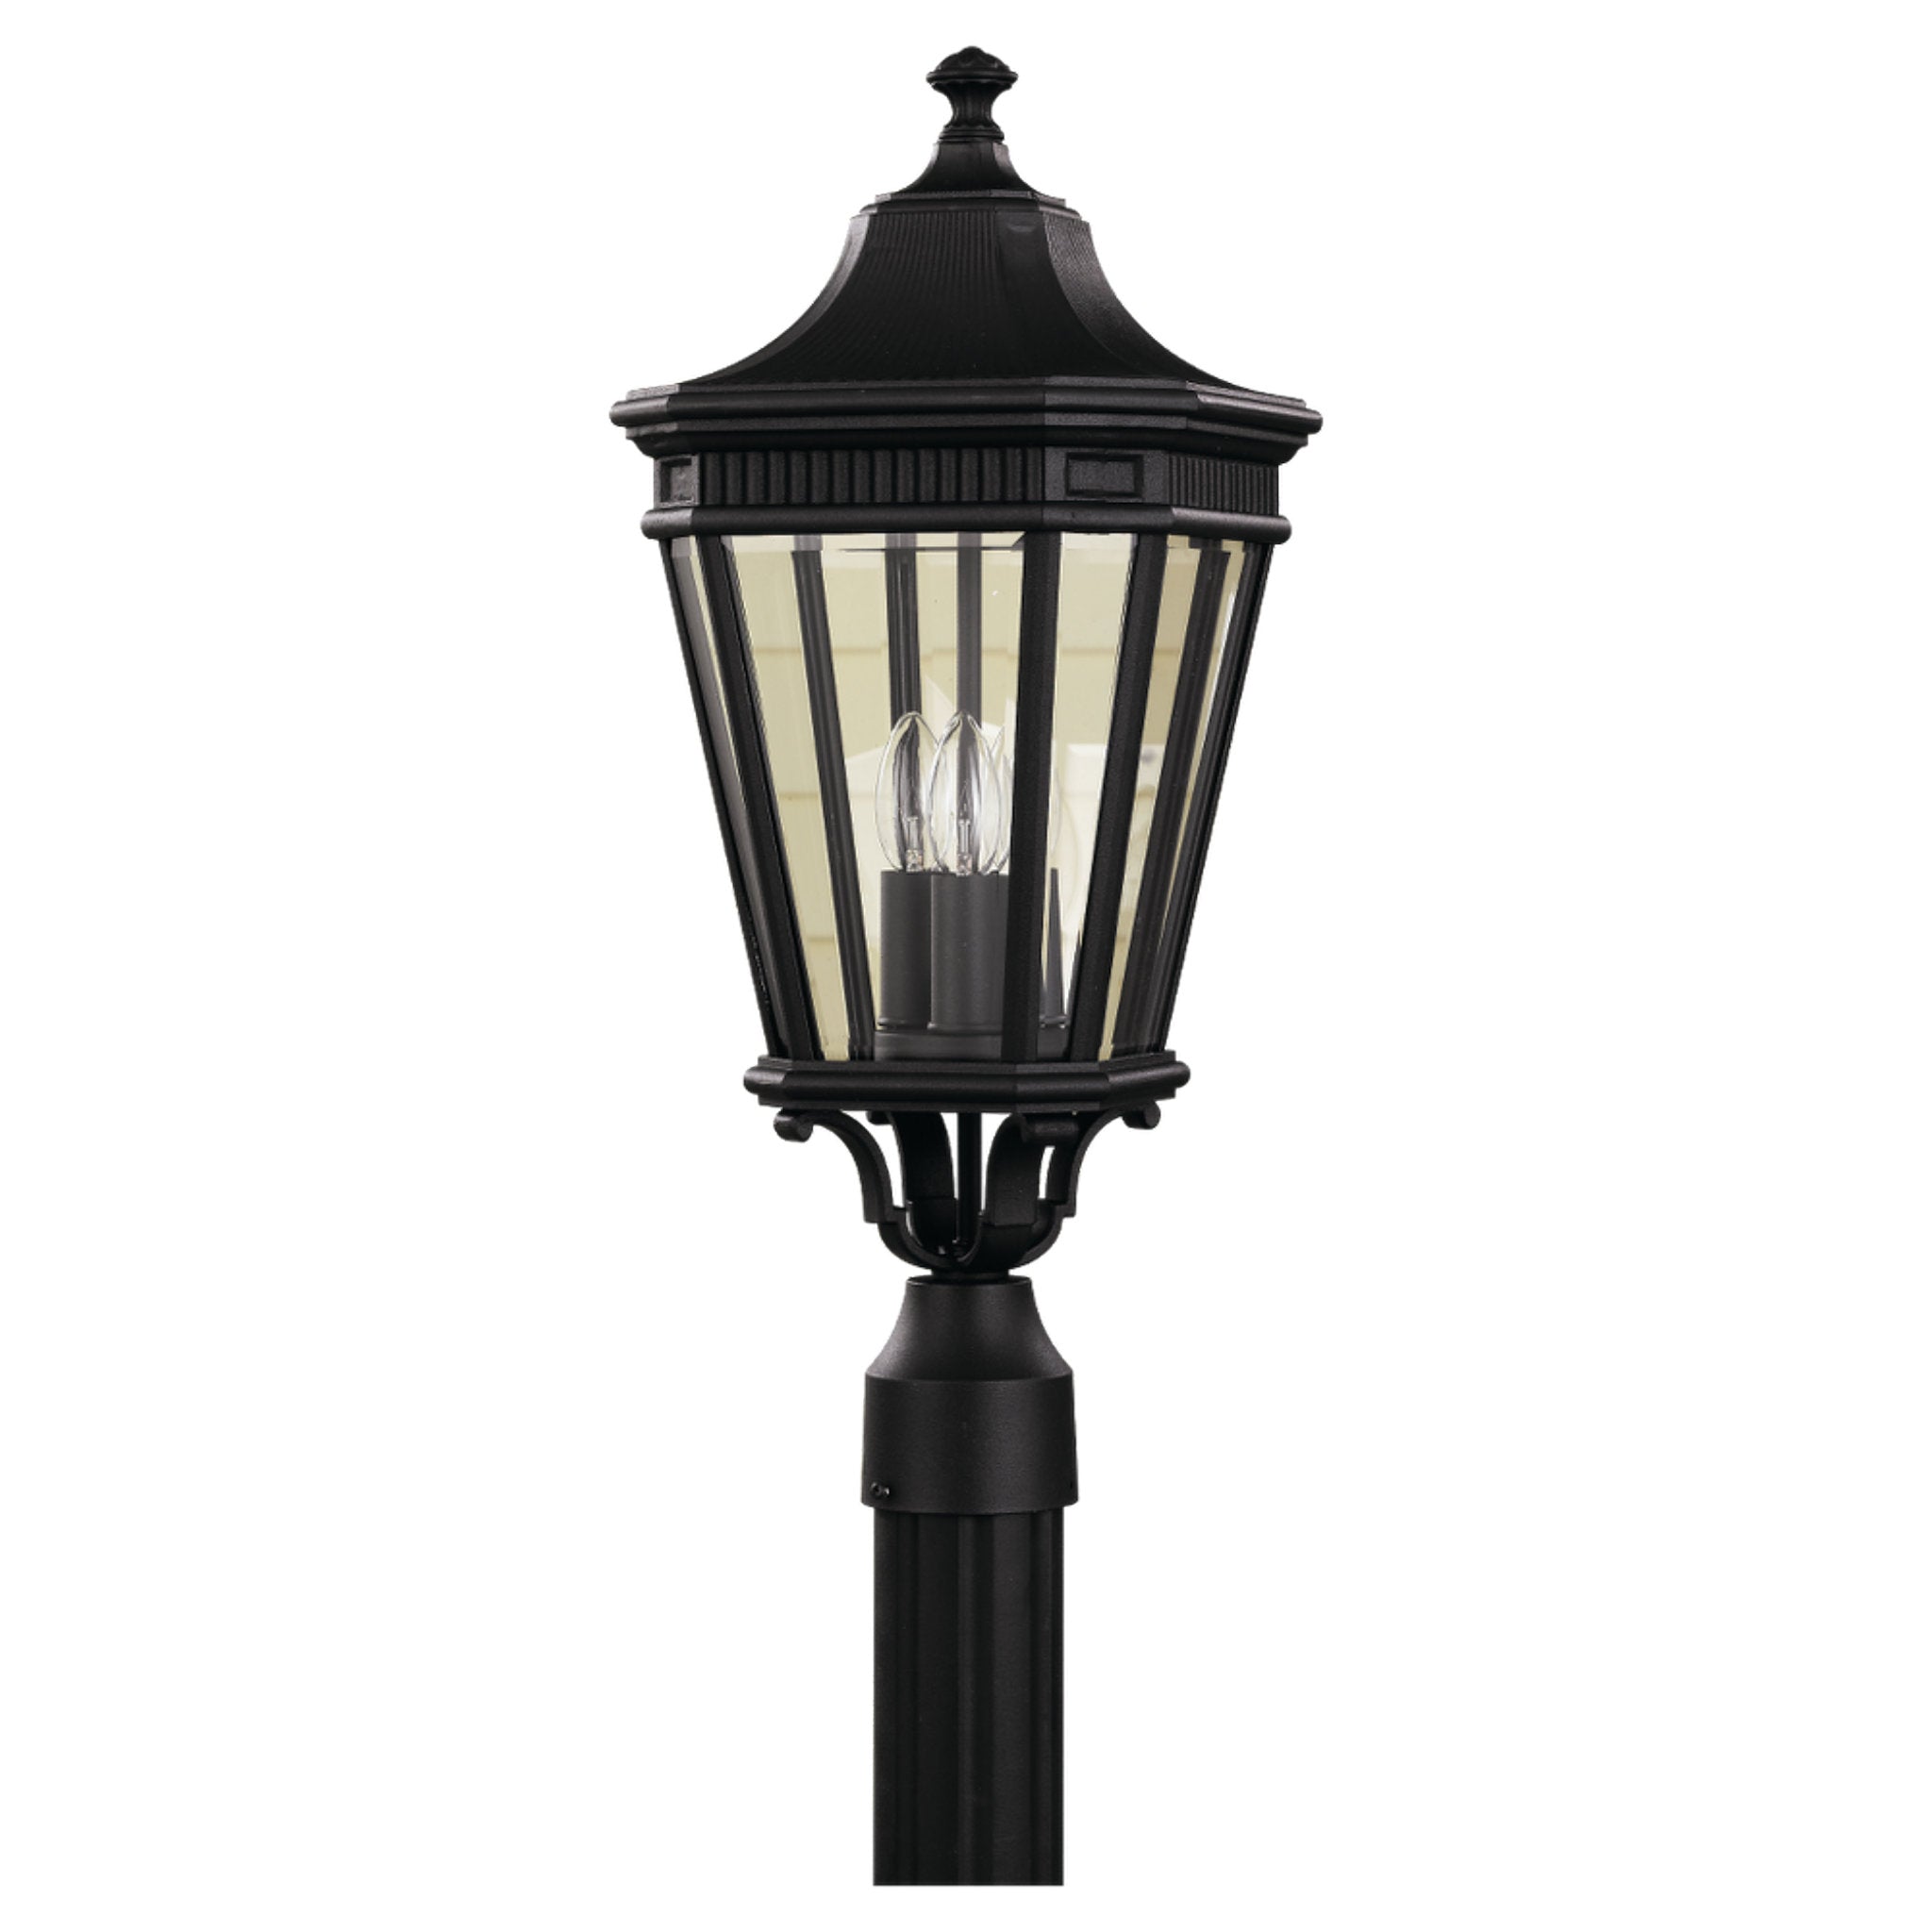 Cotswold Lane Small Post Lantern Traditional Outdoor Fixture 9.5" Width 22.5" Height Aluminum Irregular Clear Beveled Shade in Black